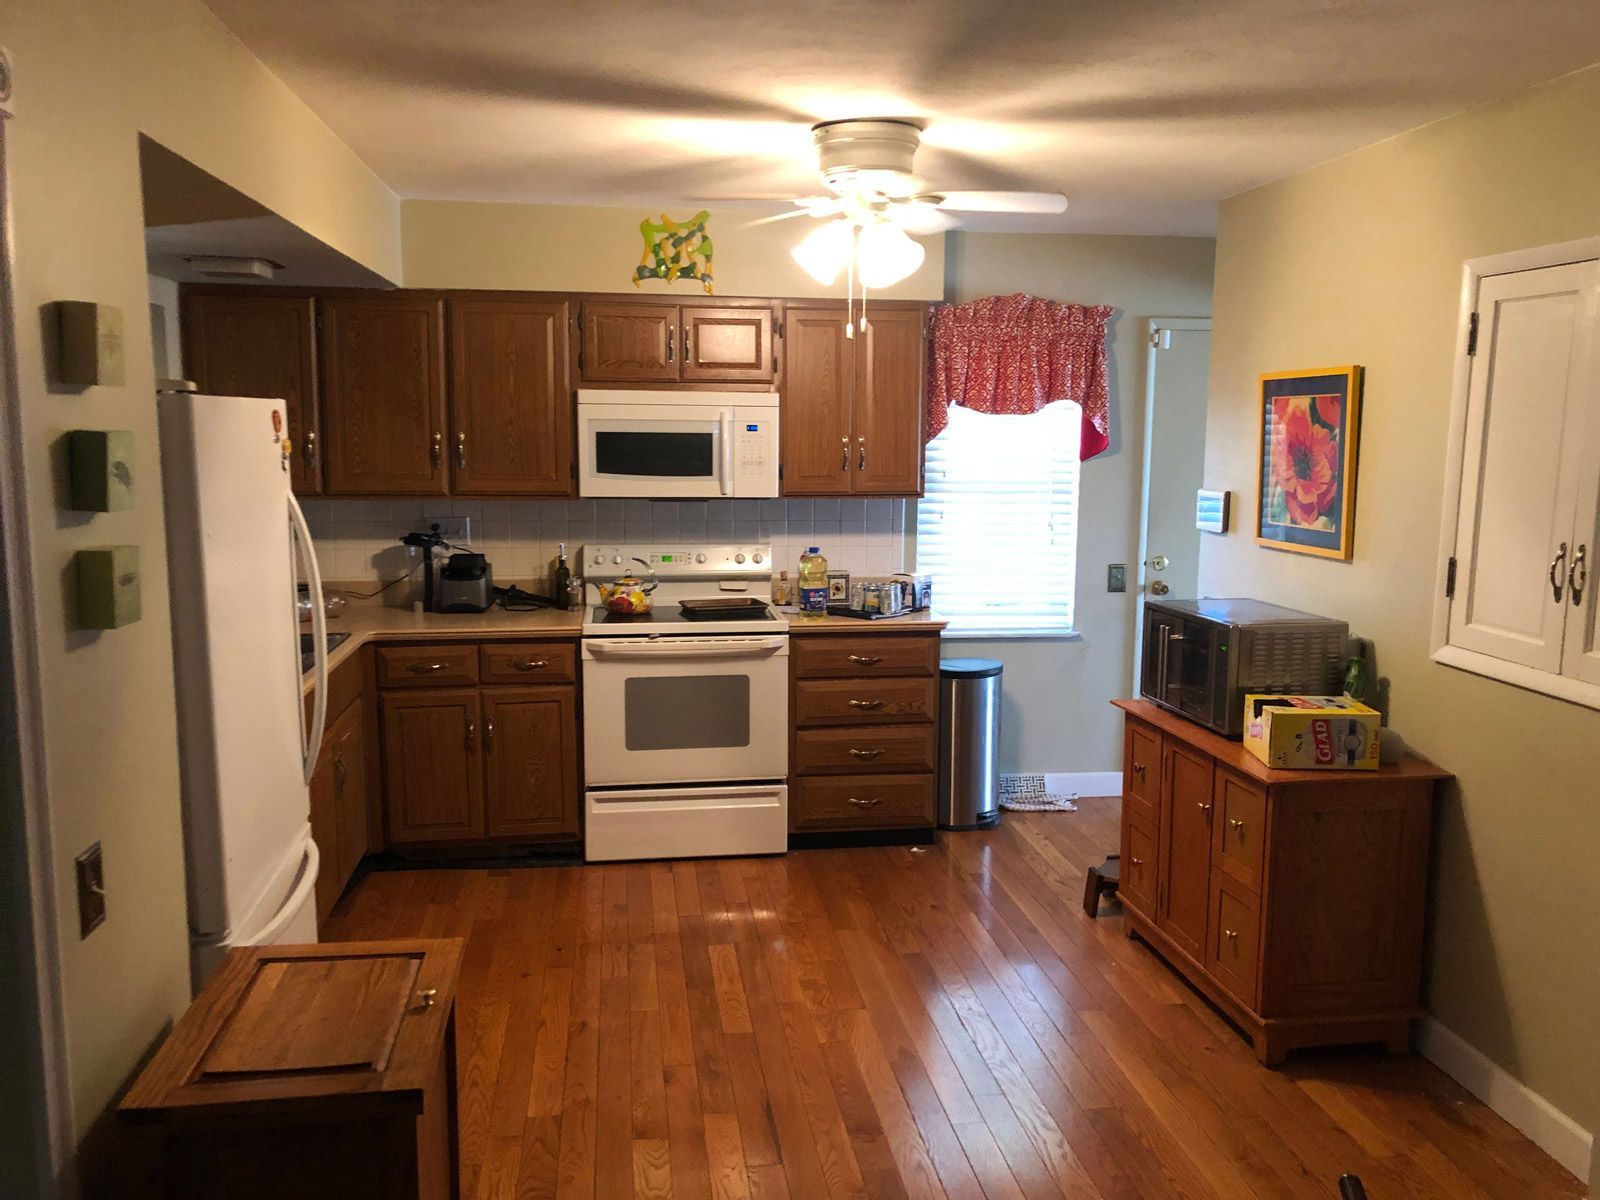 Kitchen And Cabinets | St. Louis, MO | Cheri Buys Houses